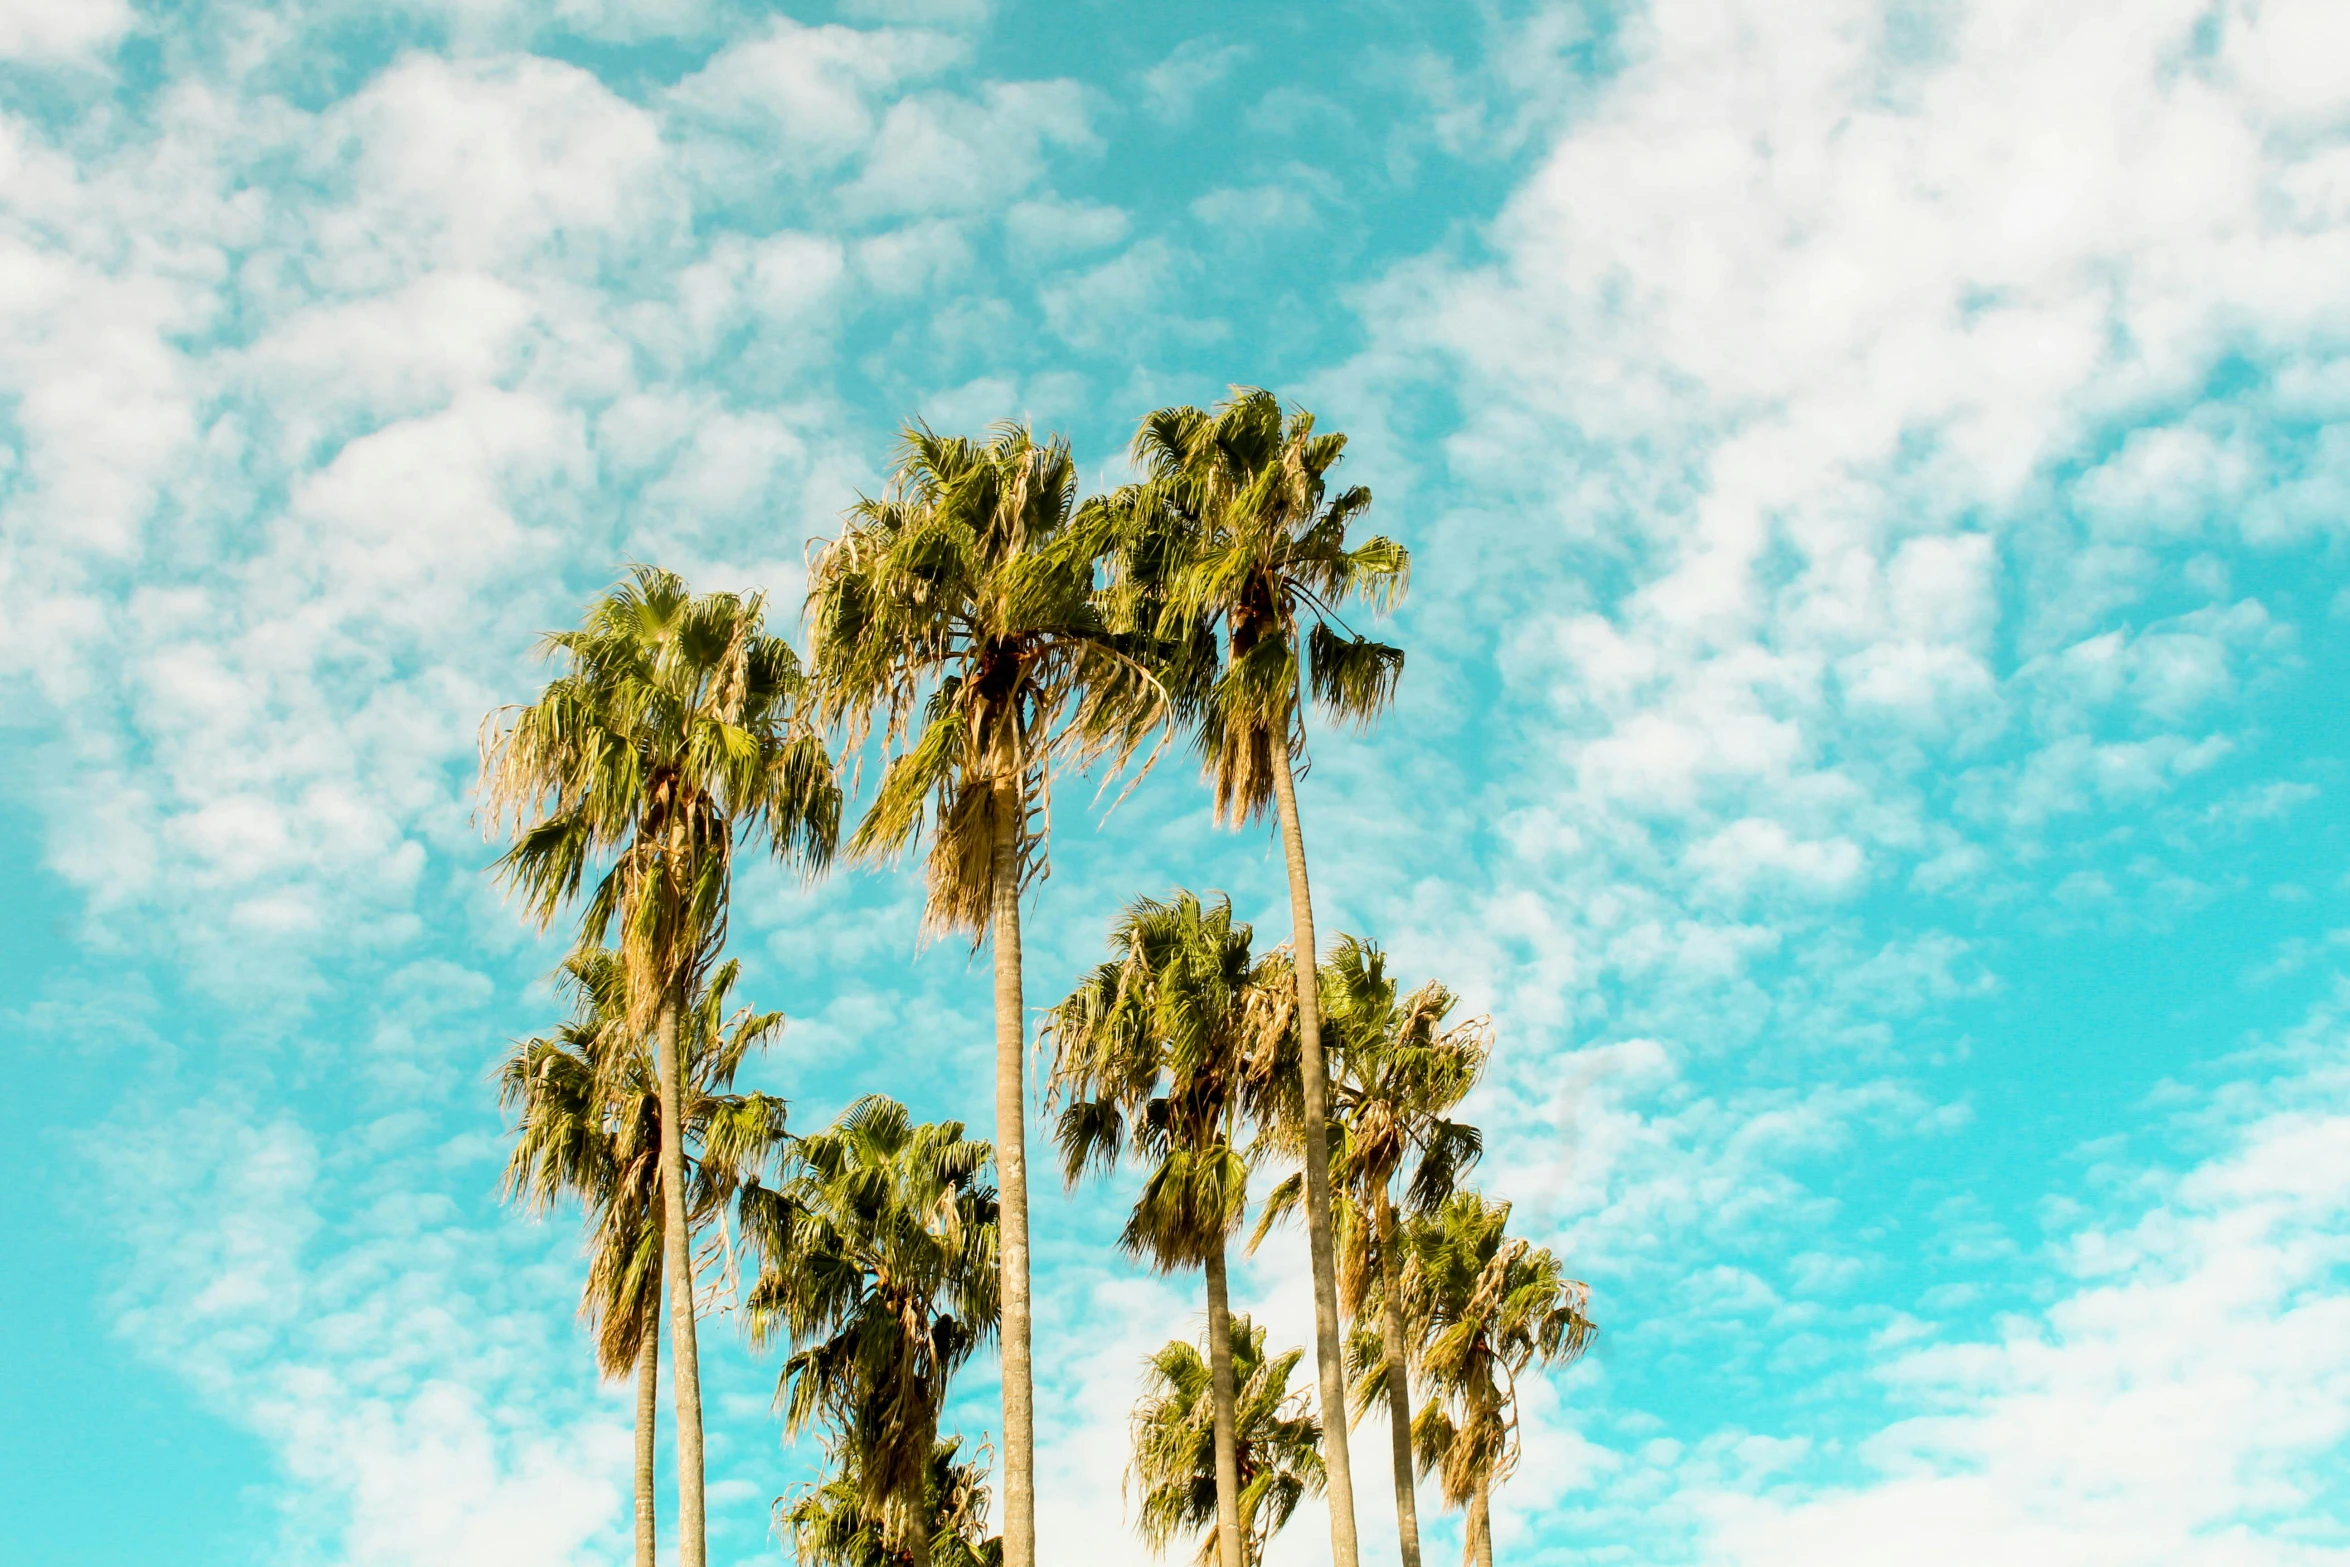 a group of palm trees sitting on top of a lush green field, unsplash contest winner, baroque, cotton candy trees, profile image, santa monica beach, light blue sky with clouds